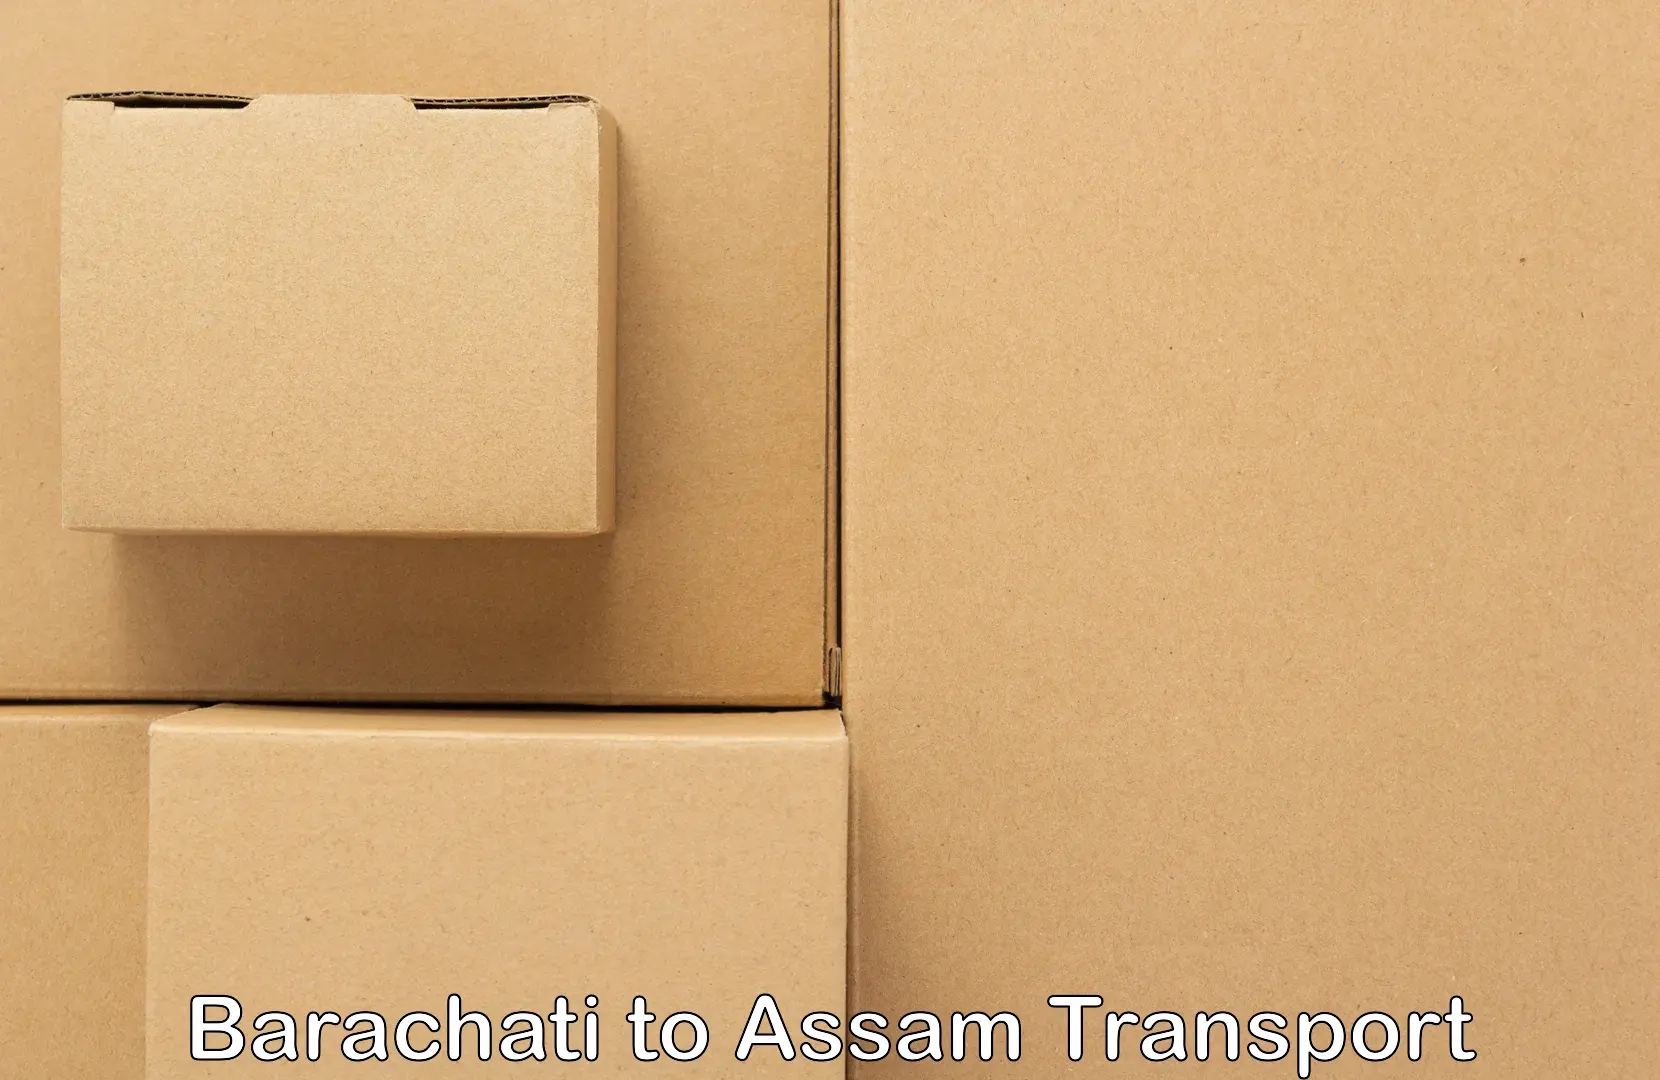 Air freight transport services in Barachati to Guwahati University